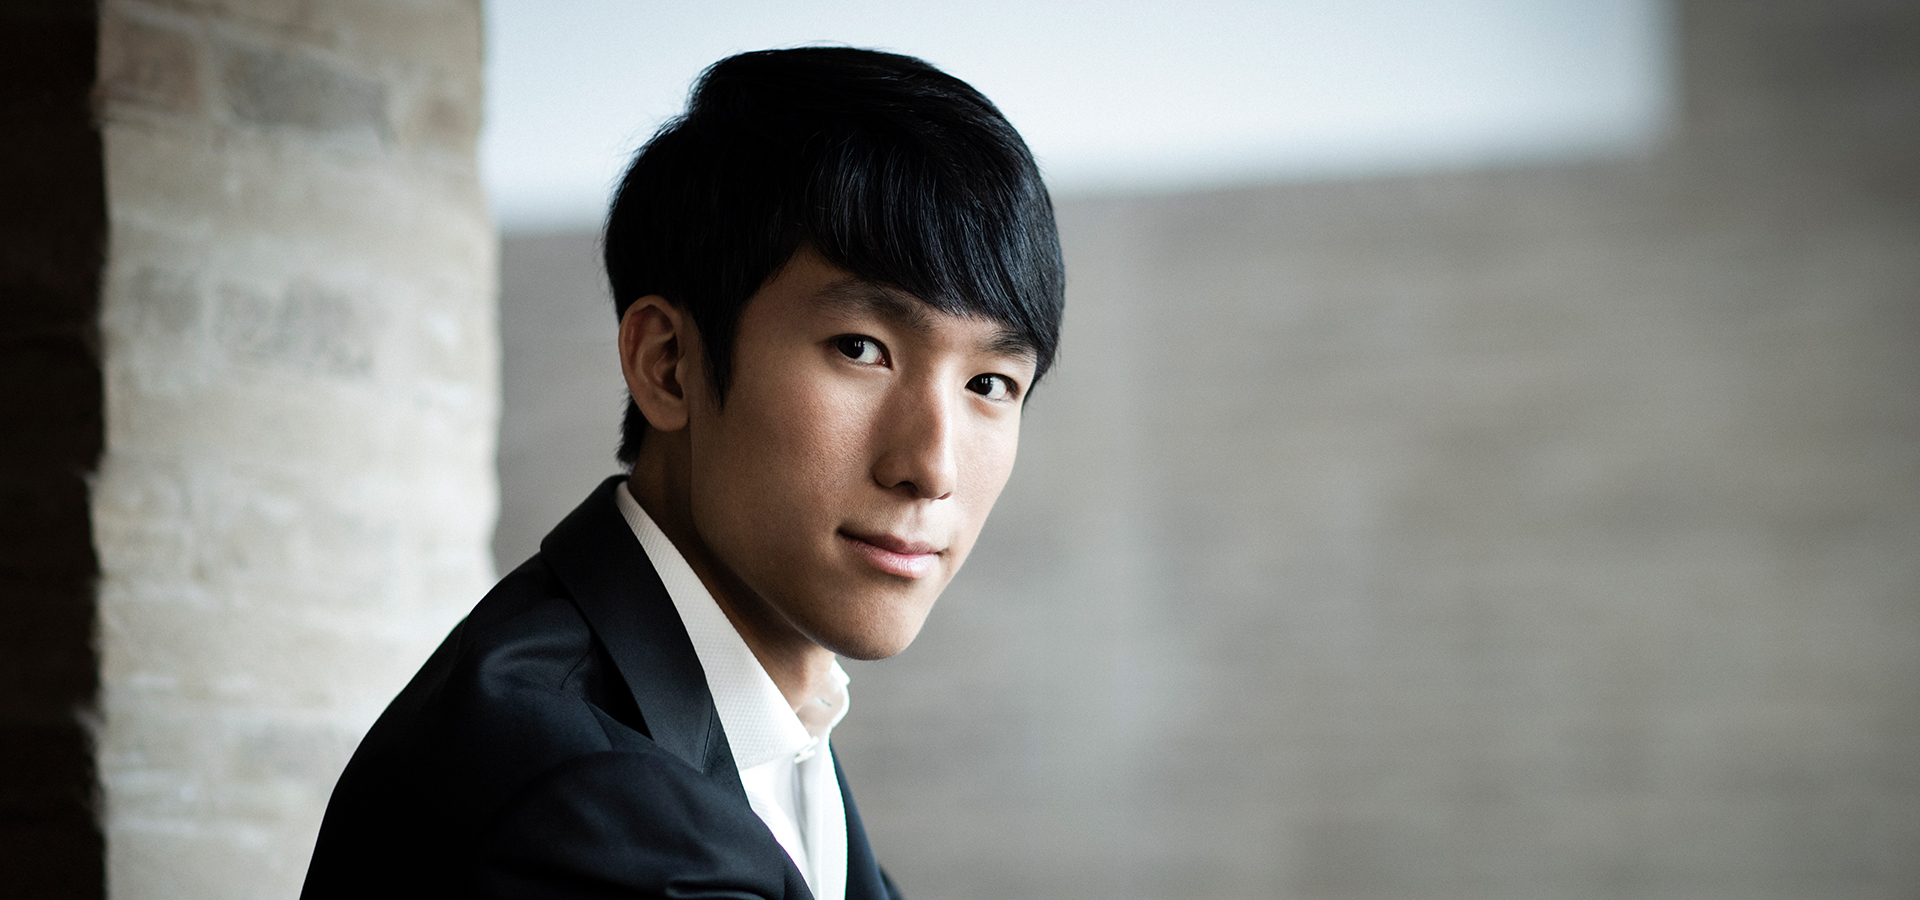 Asian American Pianist Eric Lu looks confidently into the camera wearing a suit and tie.